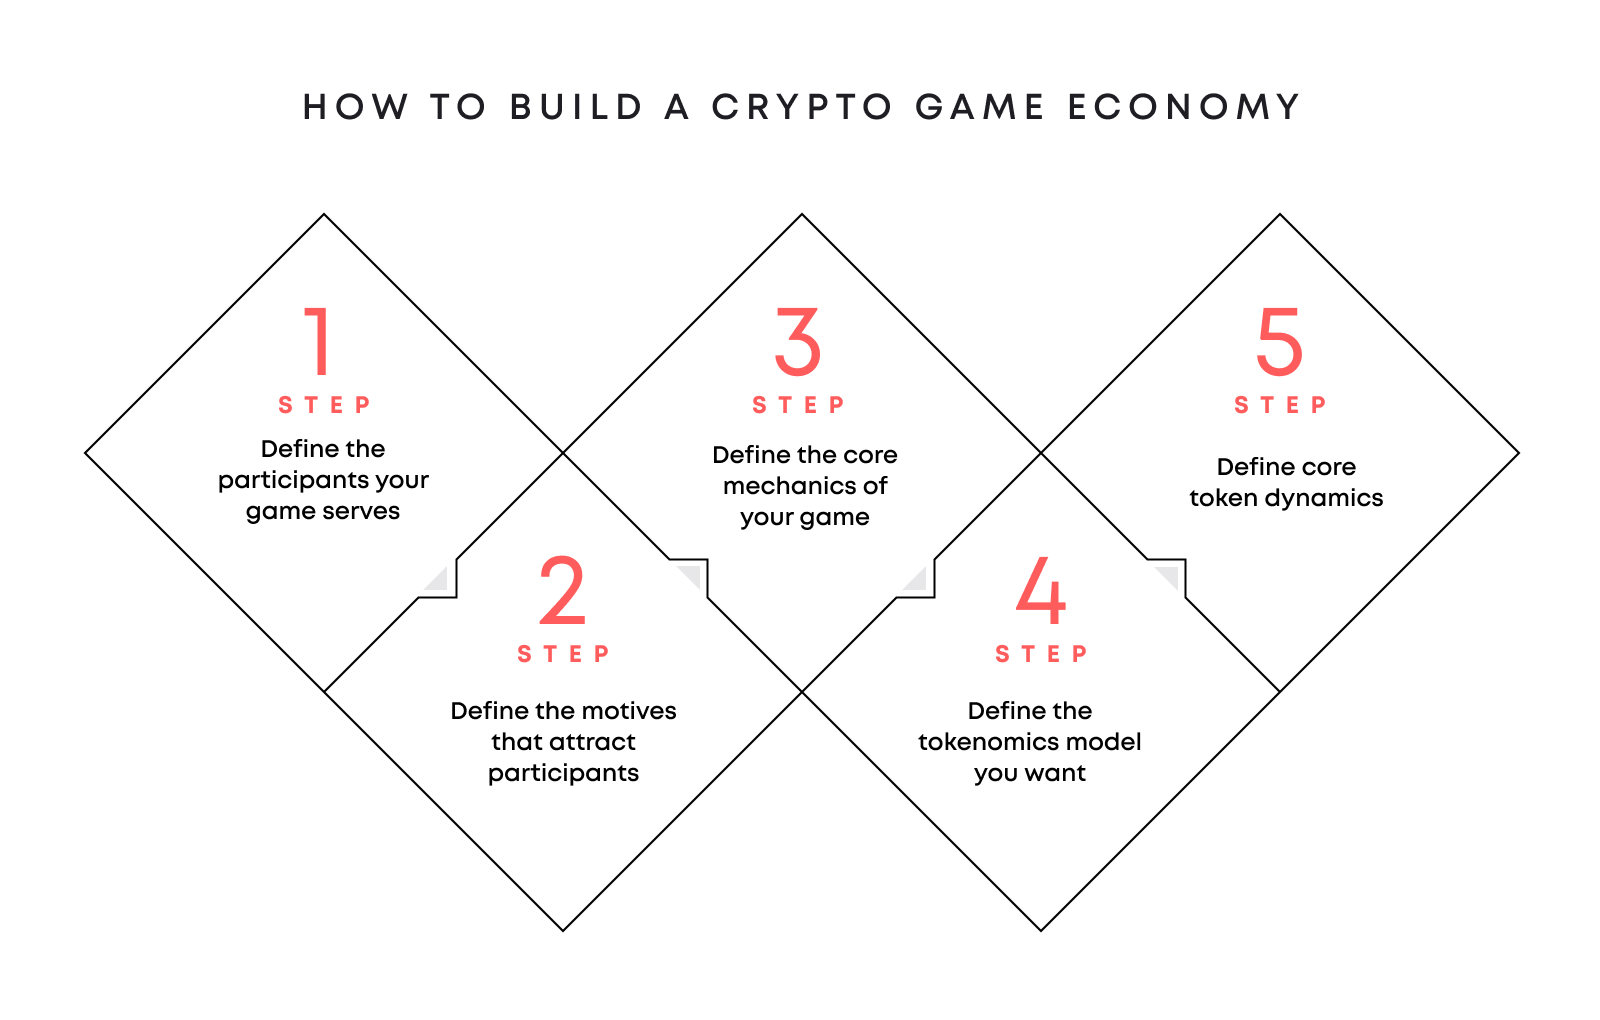 The process of building tokenomics for crypto games step by step